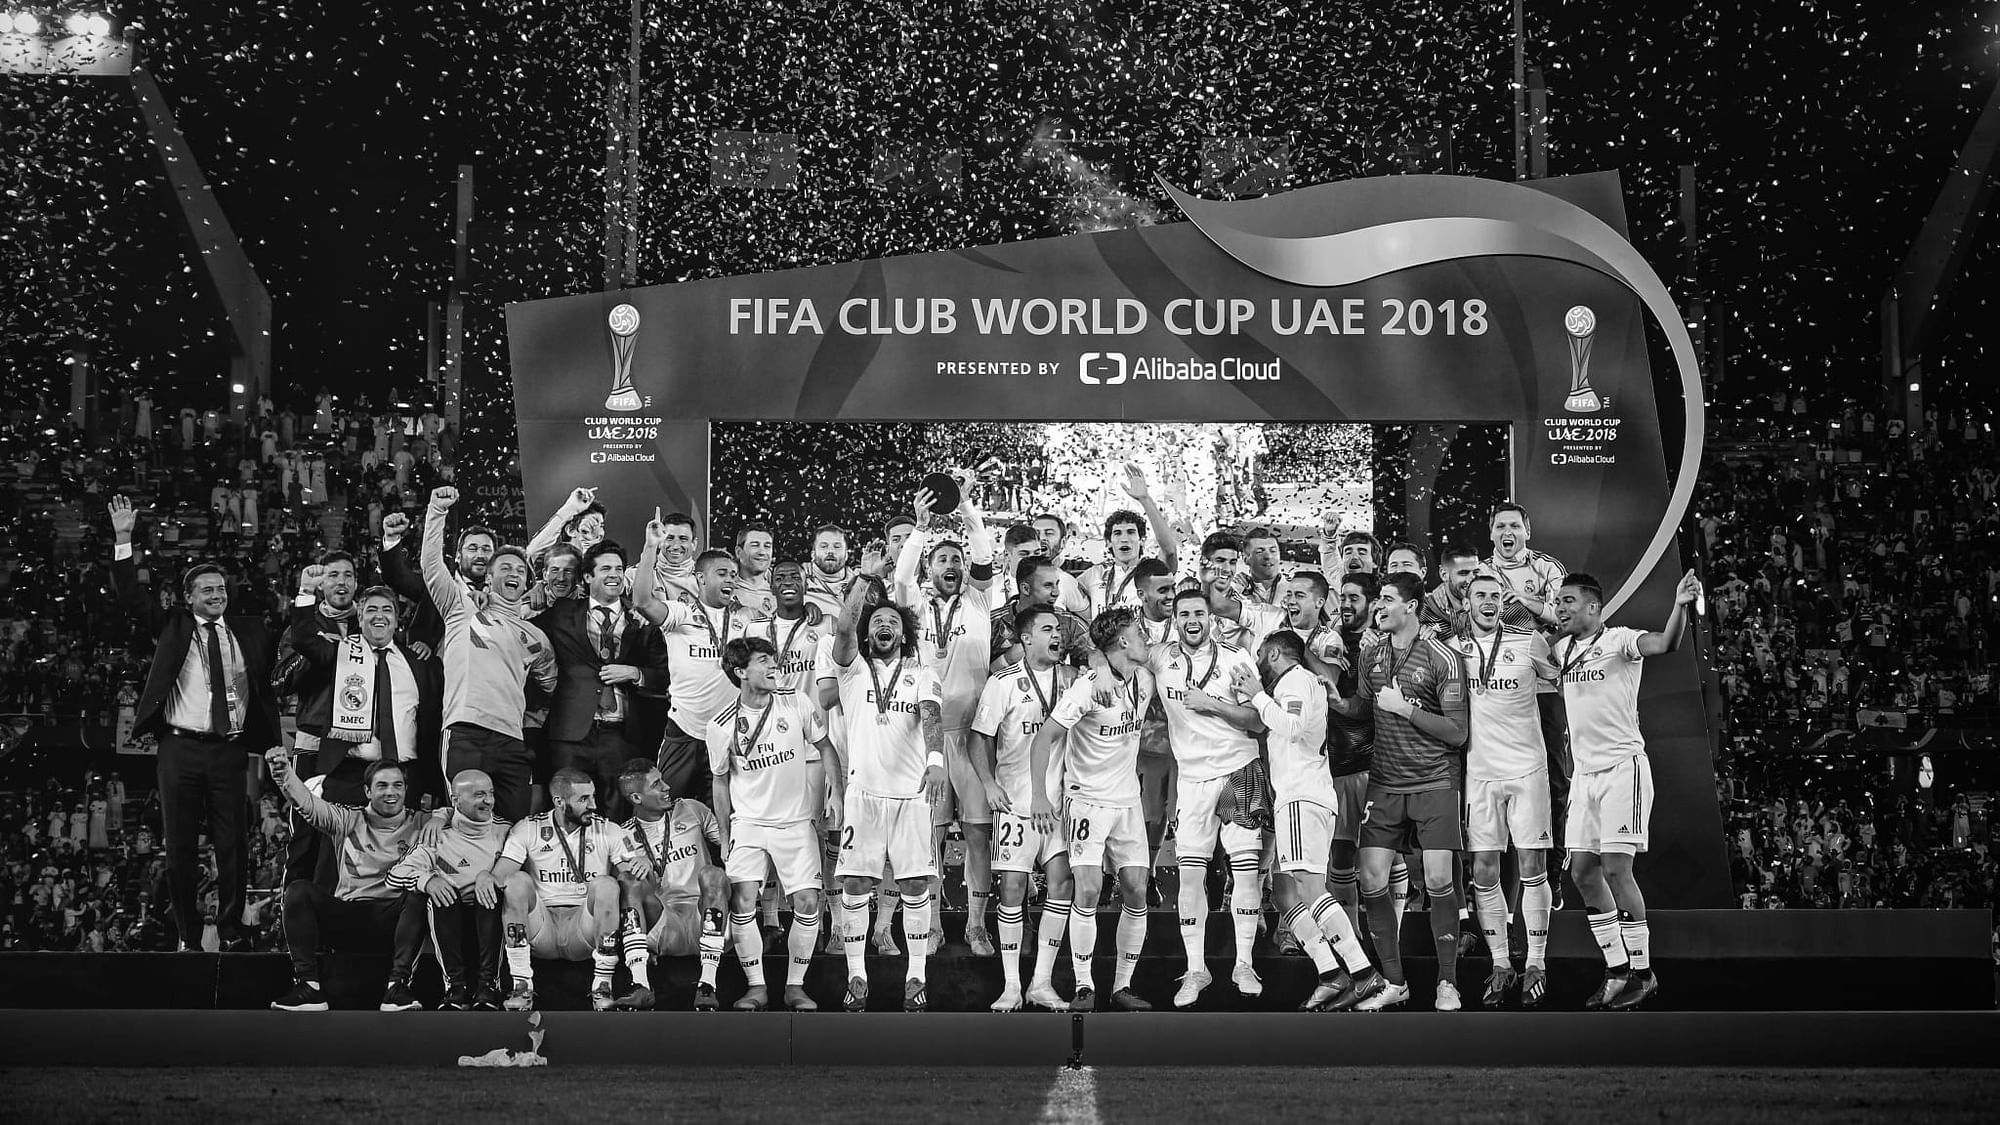 Real Madrid are the current champions of the FIFA Club World Cup